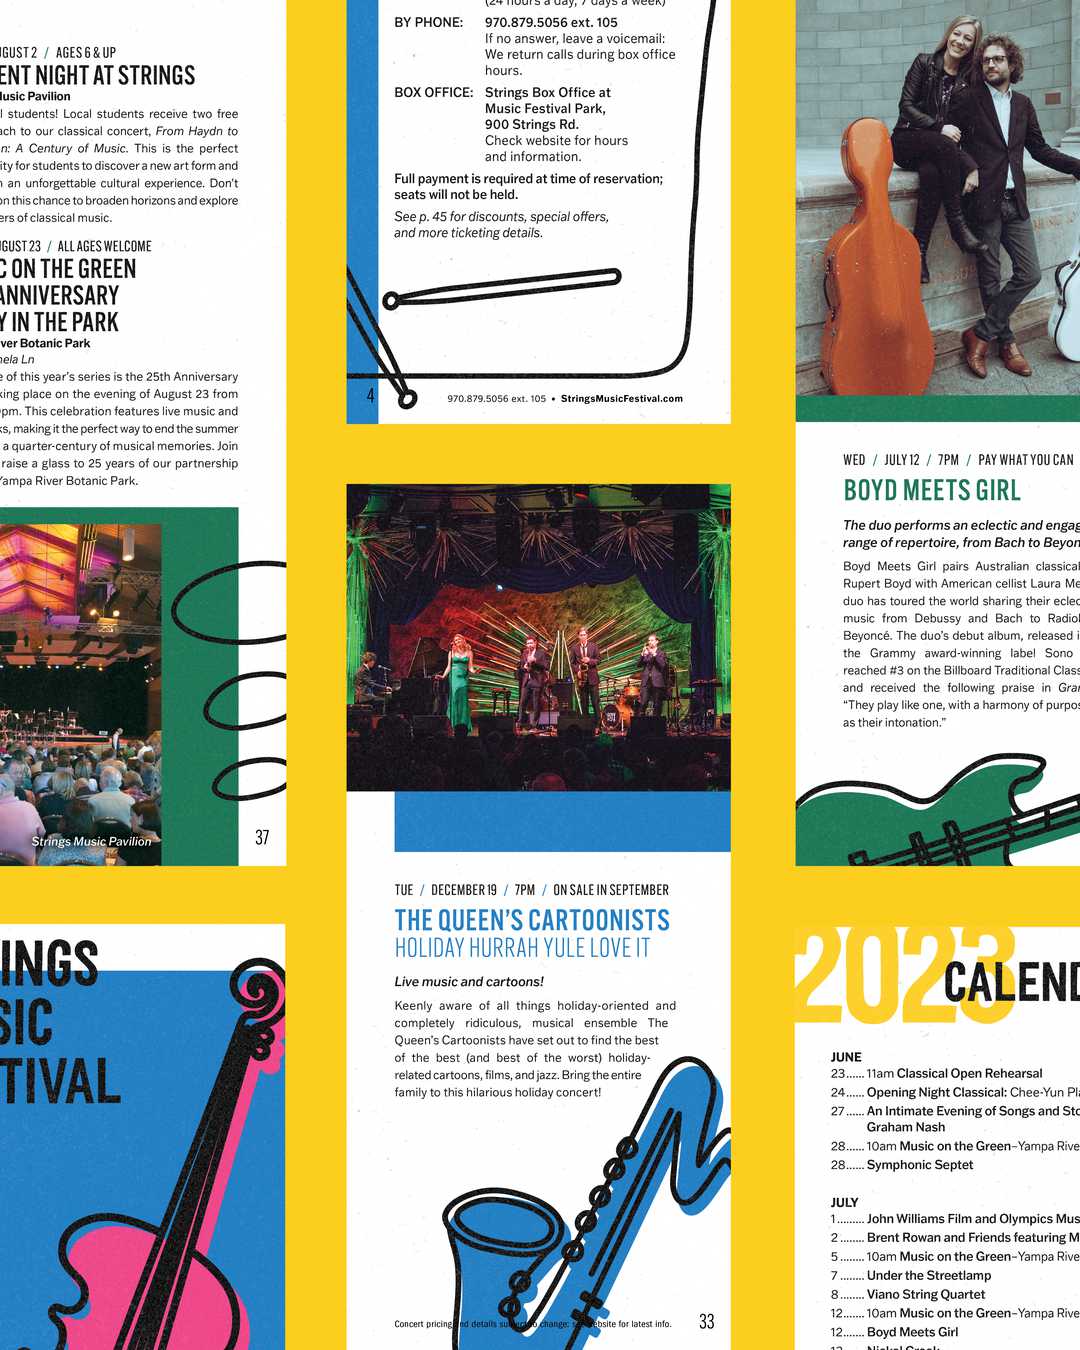 Strings music festival program art laid out on yellow background